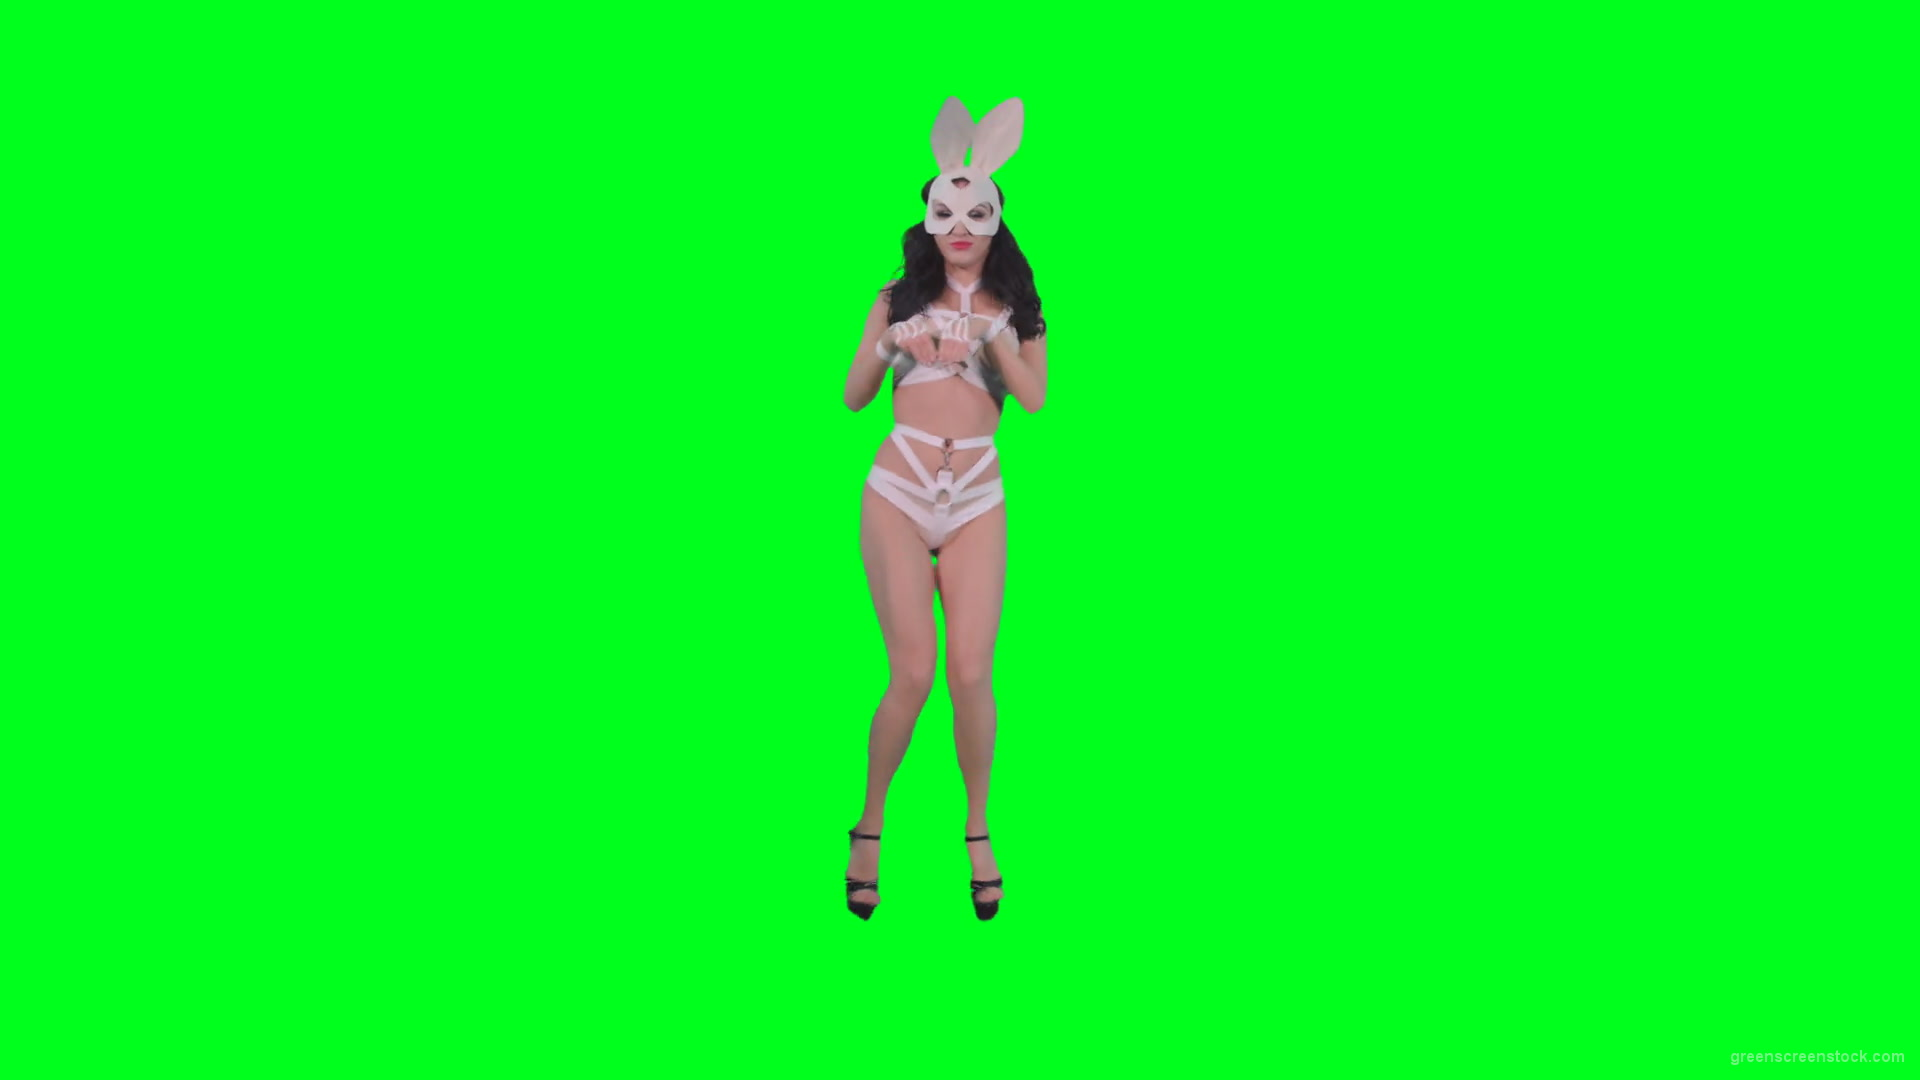 Sexy-woman-jumping-in-Go-Go-style-in-rabbit-mask-on-green-screen-4K-Video-Footage-1920_005 Green Screen Stock